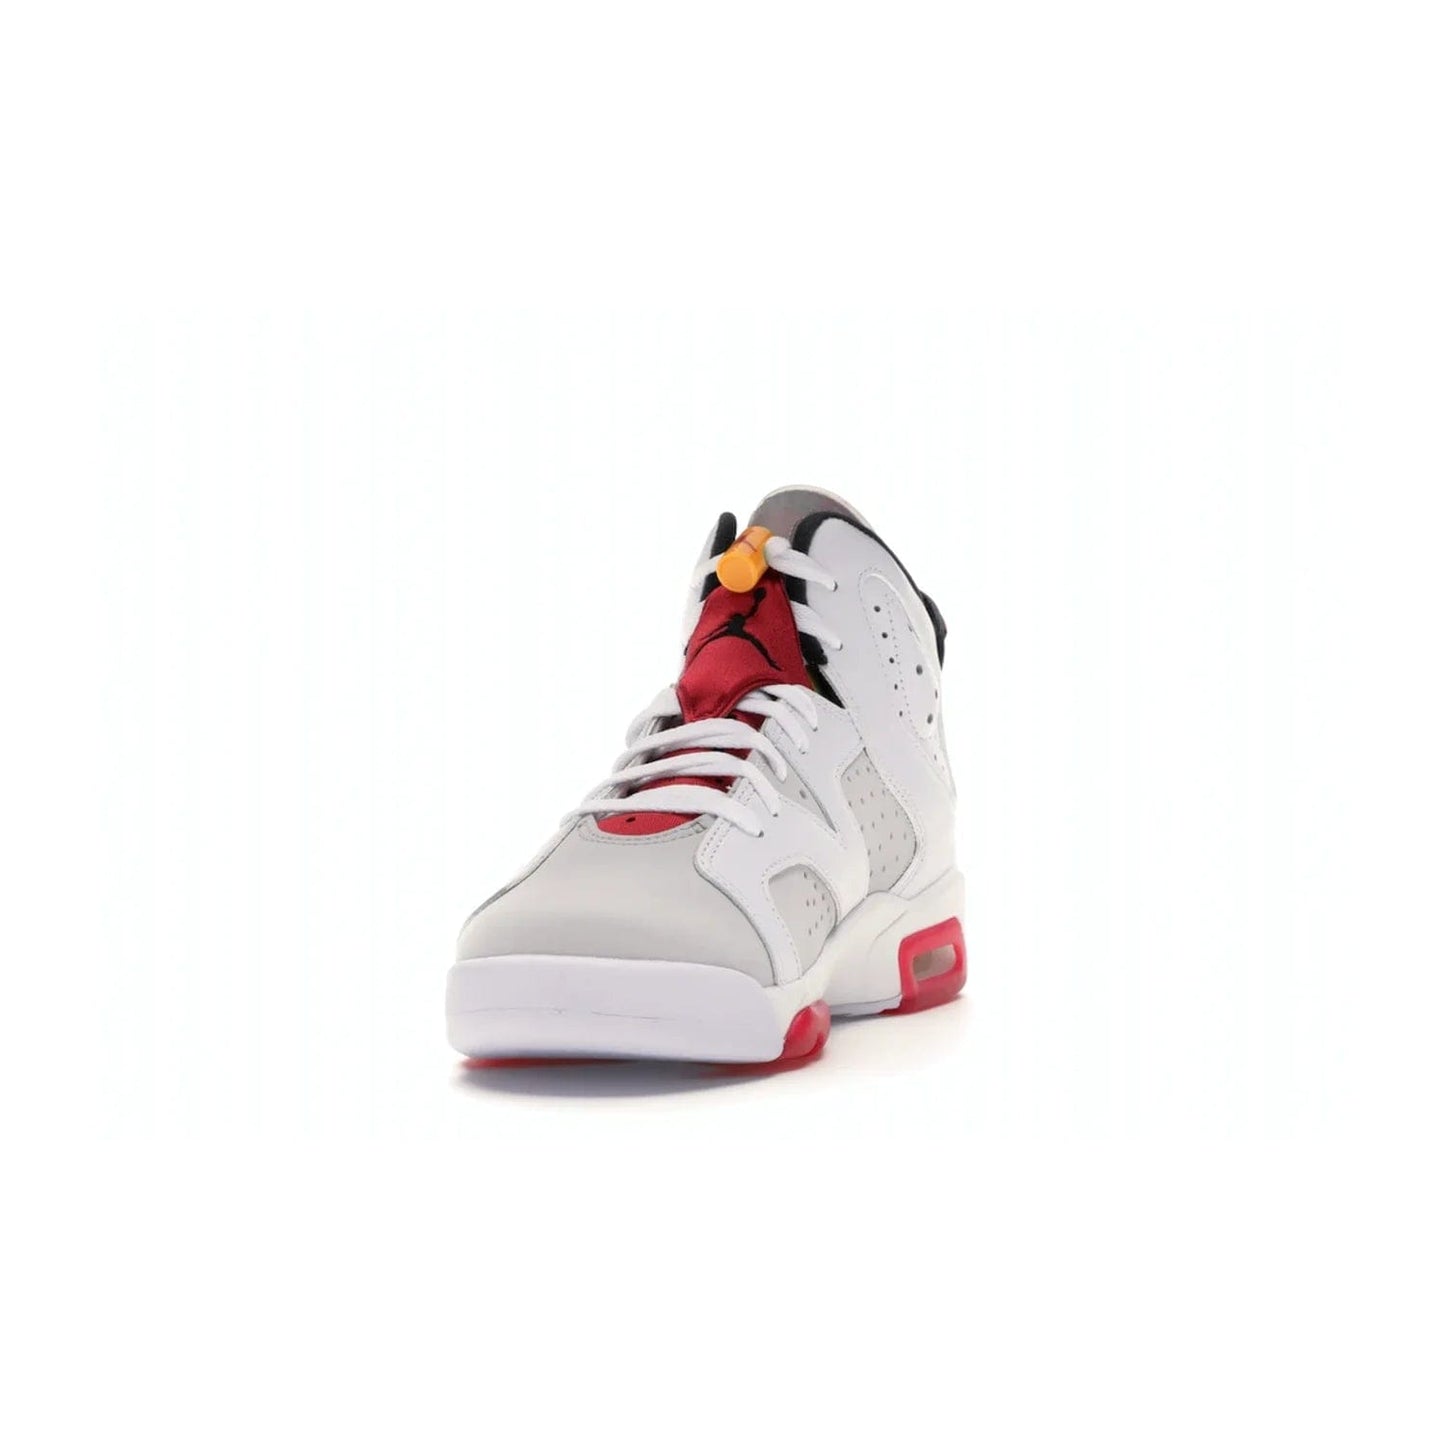 Jordan 6 Retro Hare (GS) - Image 12 - Only at www.BallersClubKickz.com - The Air Jordan 6 Hare GS. Comfortable suede upper, perforations, red pods, two-tone midsole, and signature "Jumpman" emblem. Released 17 June 2020. Perfect for any sneakerhead.